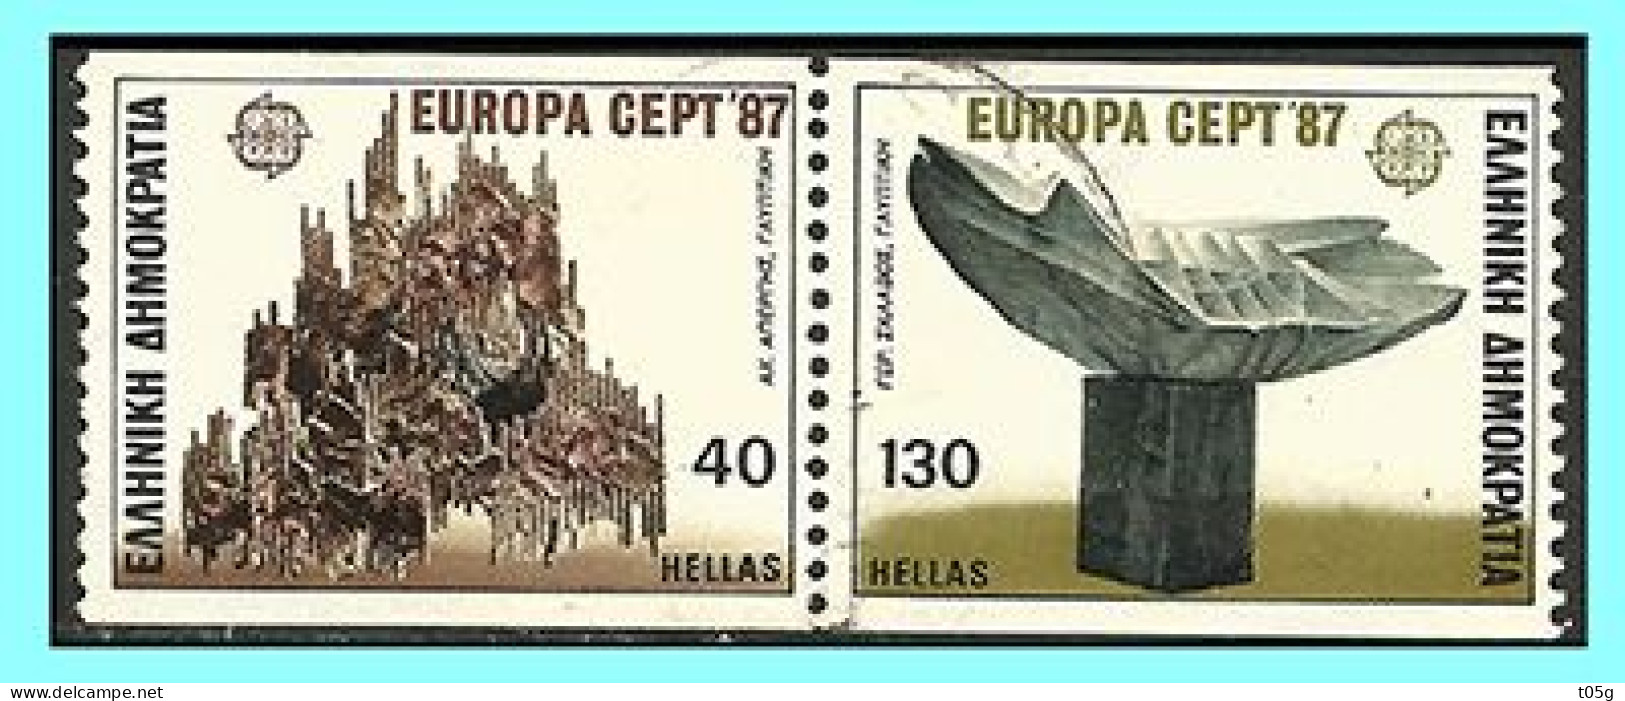 GREECE- GRECE- HELLAS 1987:  Europa CEPT - Se Tenant - Horizintally perforated  - Compl Set Used - Used Stamps